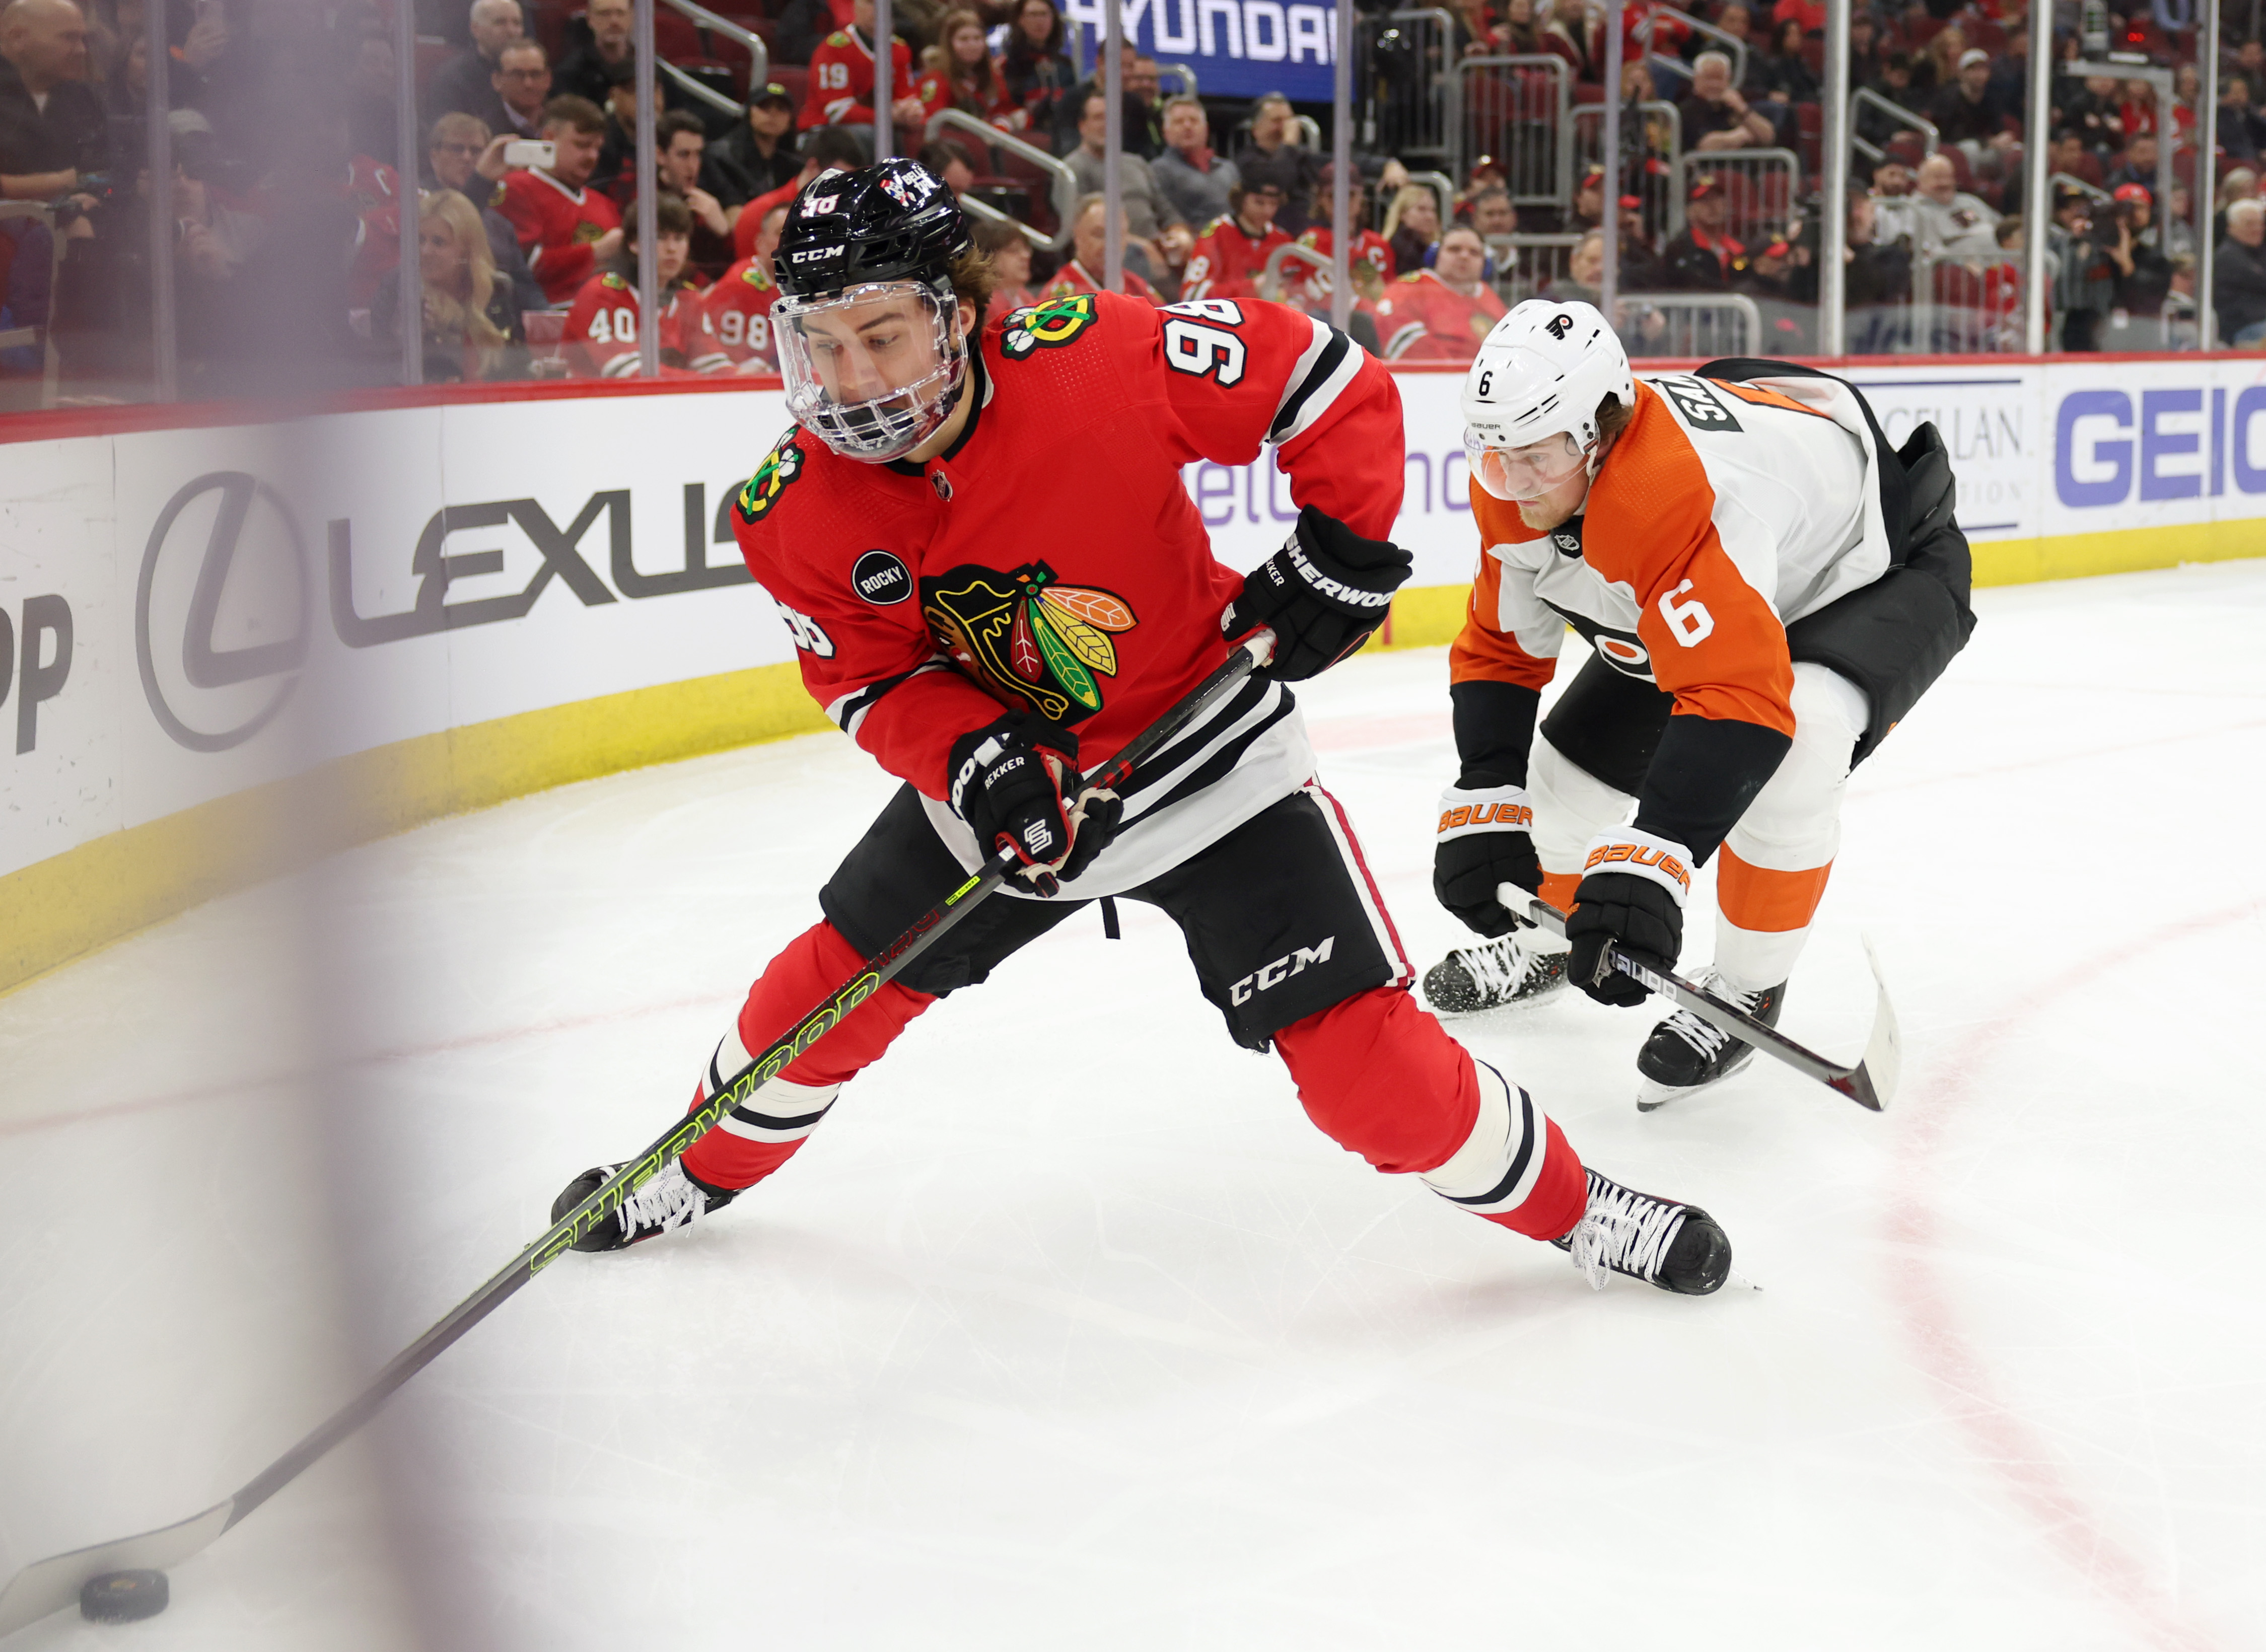 Blackhawks center Connor Bedard (98) handles the puck chased by Flyers defenseman Travis Sanheim (6) in the first period at the United Center in Chicago on Feb. 21, 2024.  (John J. Kim/Chicago Tribune)